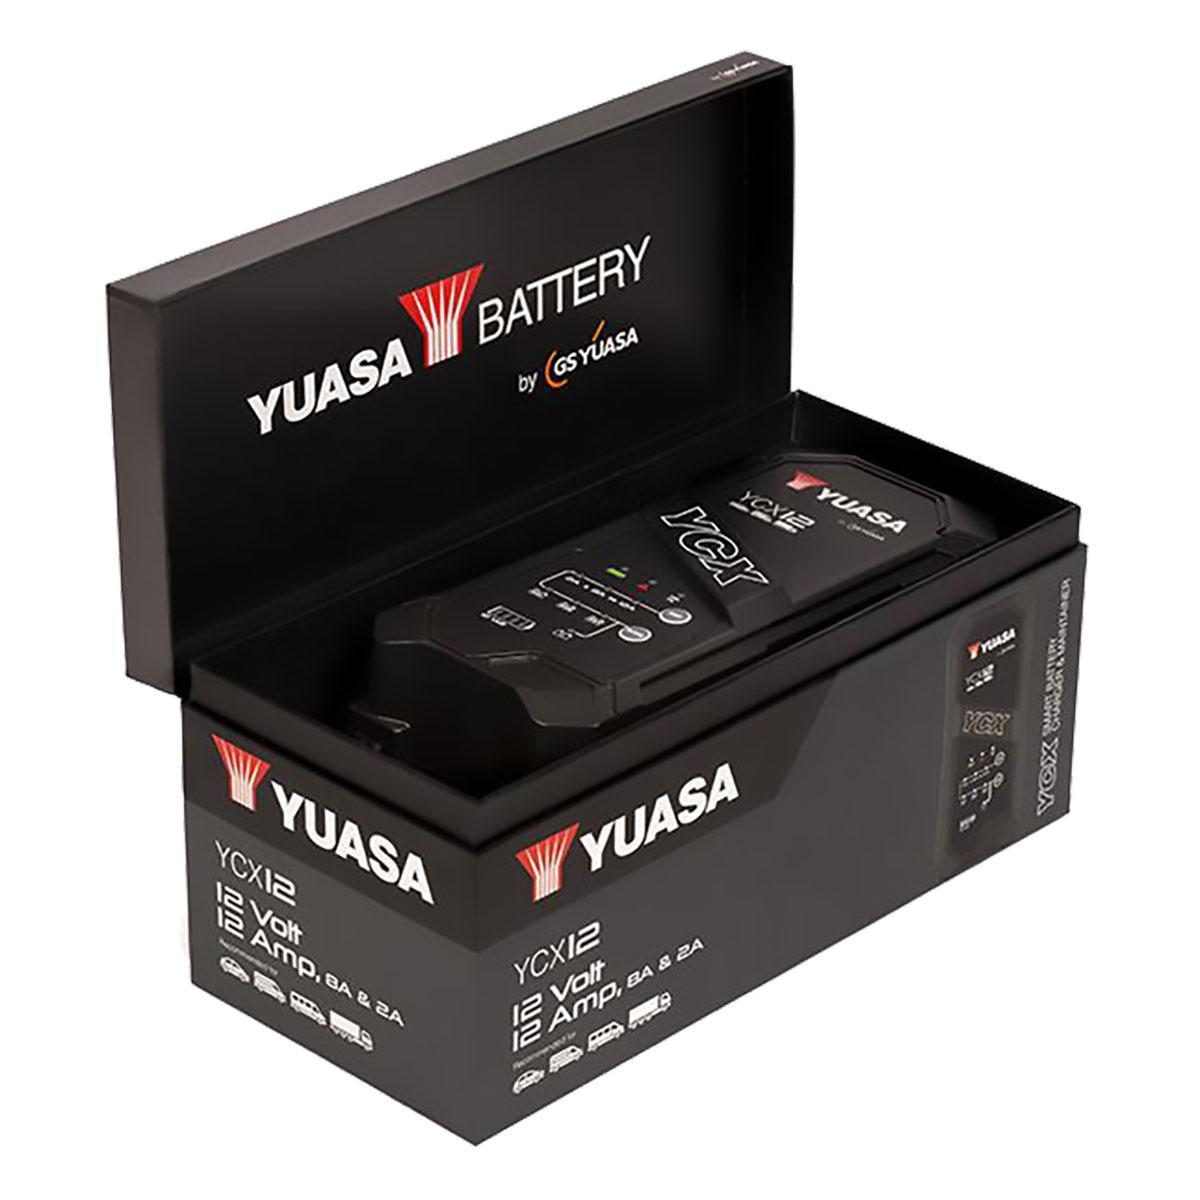 YCX12 Yuasa 12V 12A 9 Stage Smart Battery Charger & Maintainer